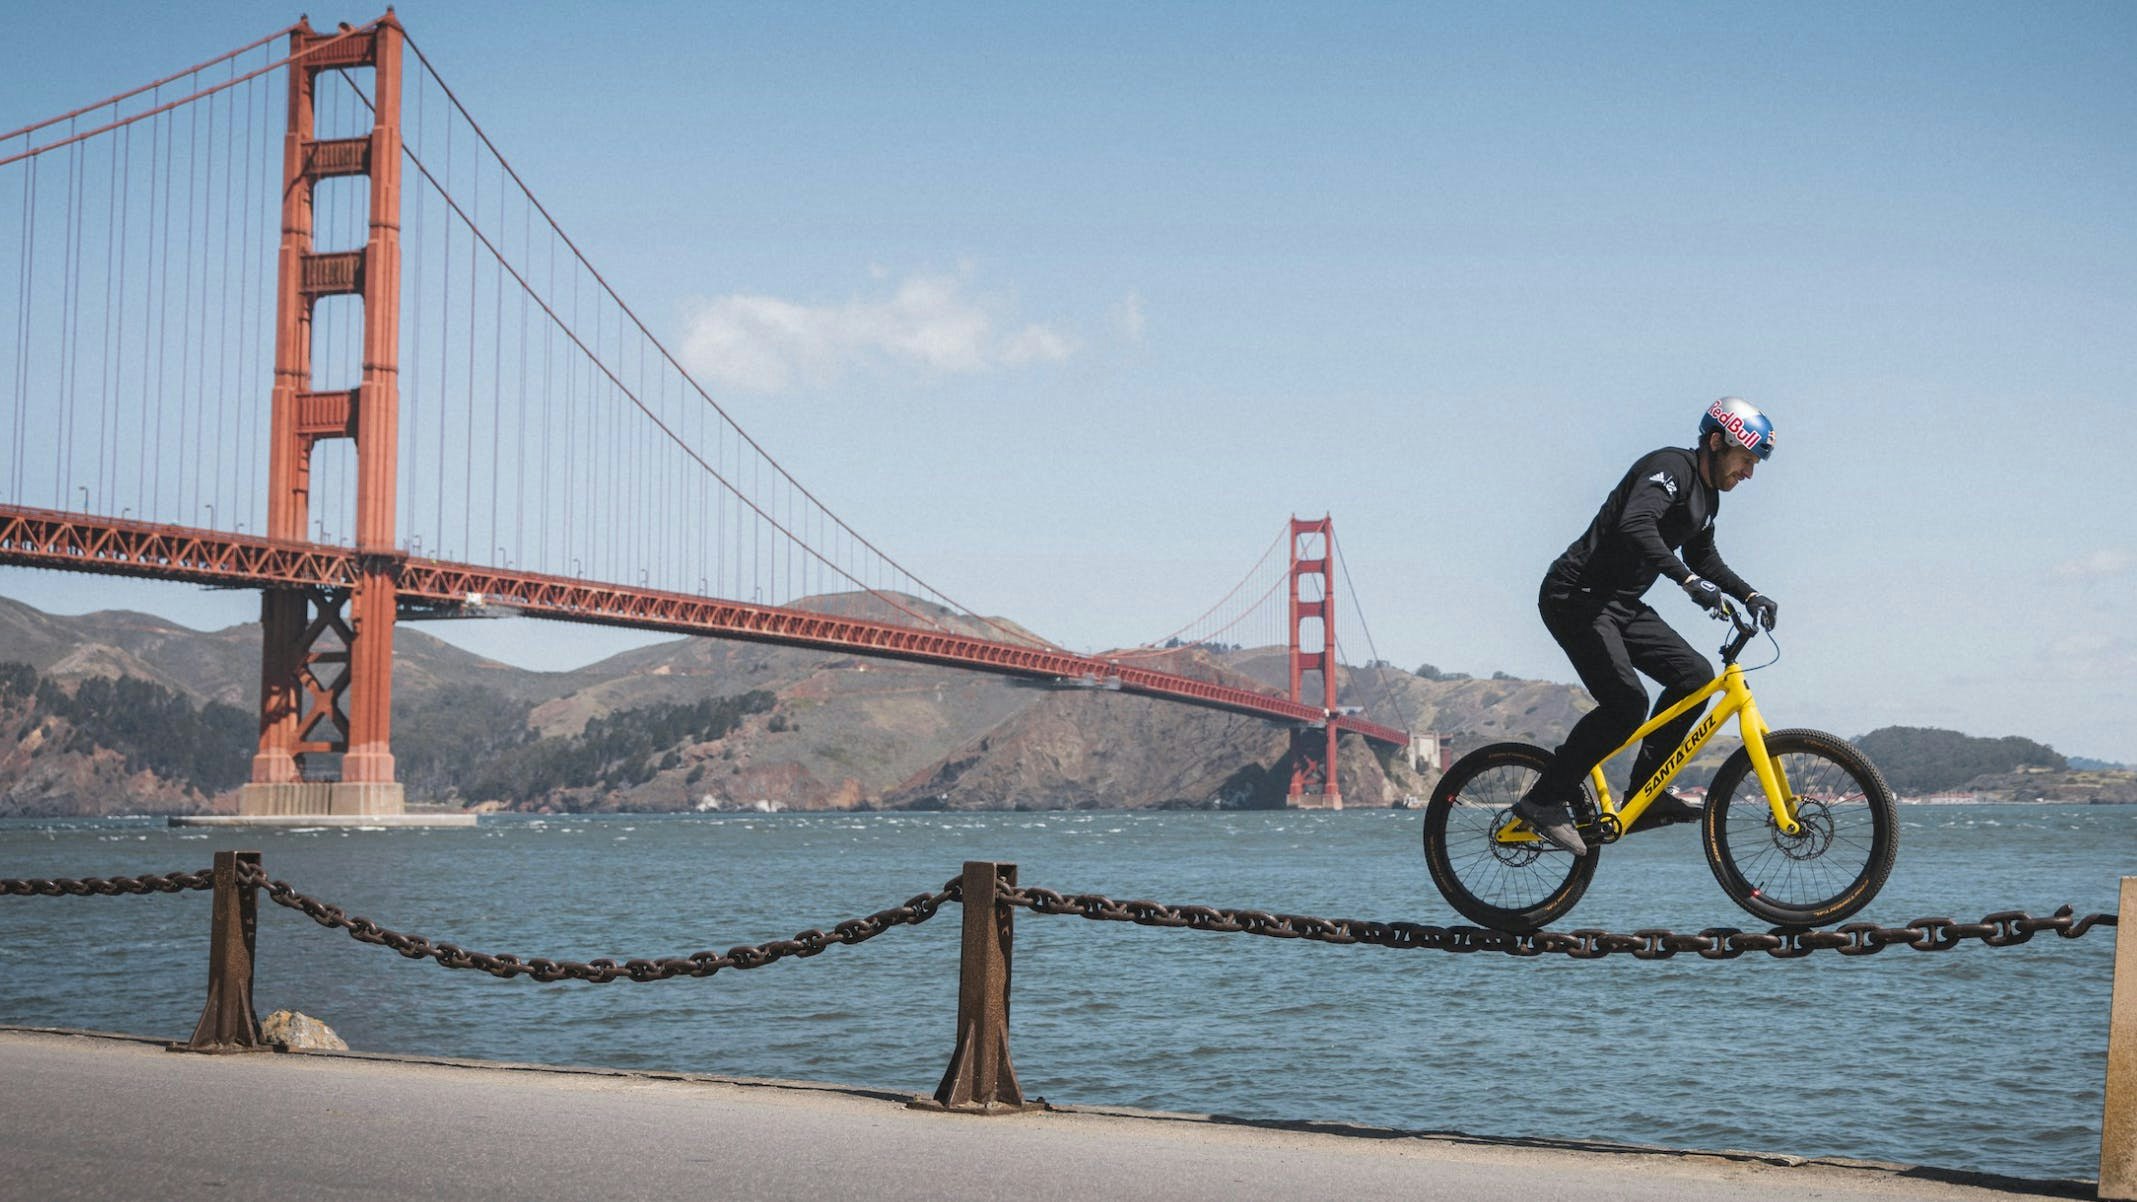 Danny Macaskill riding along a chain in front of the Golden Gate Brige at Fort Point in Postcard from San Francisco 